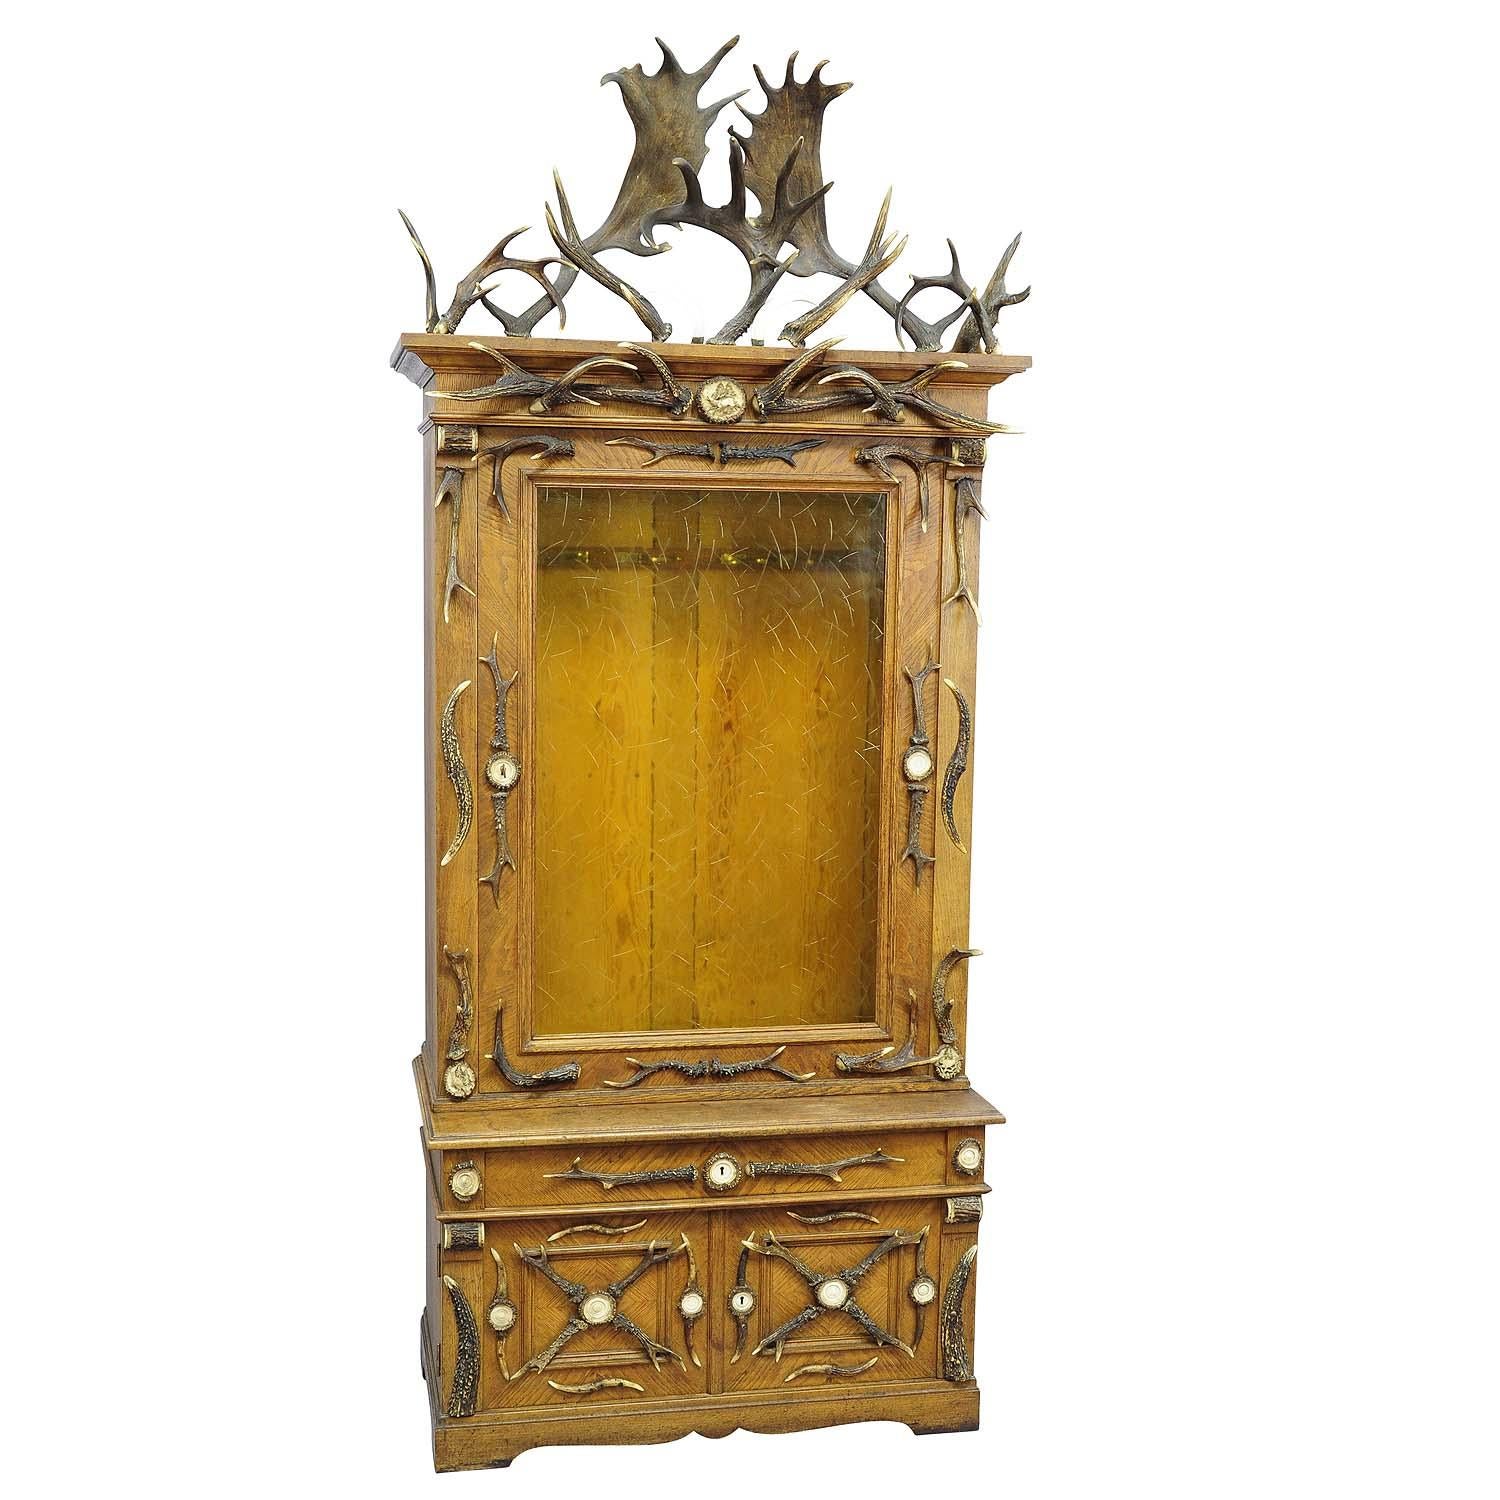 Fantastic oak wood gun cabinet with horn decoration ca. 1900

An antique Black Forest oak wood cabinet. Richly decorated with several antlers from the stag and fallow deer, wild boar tusks, turned horn ends and figural handcarved horn roses. Front